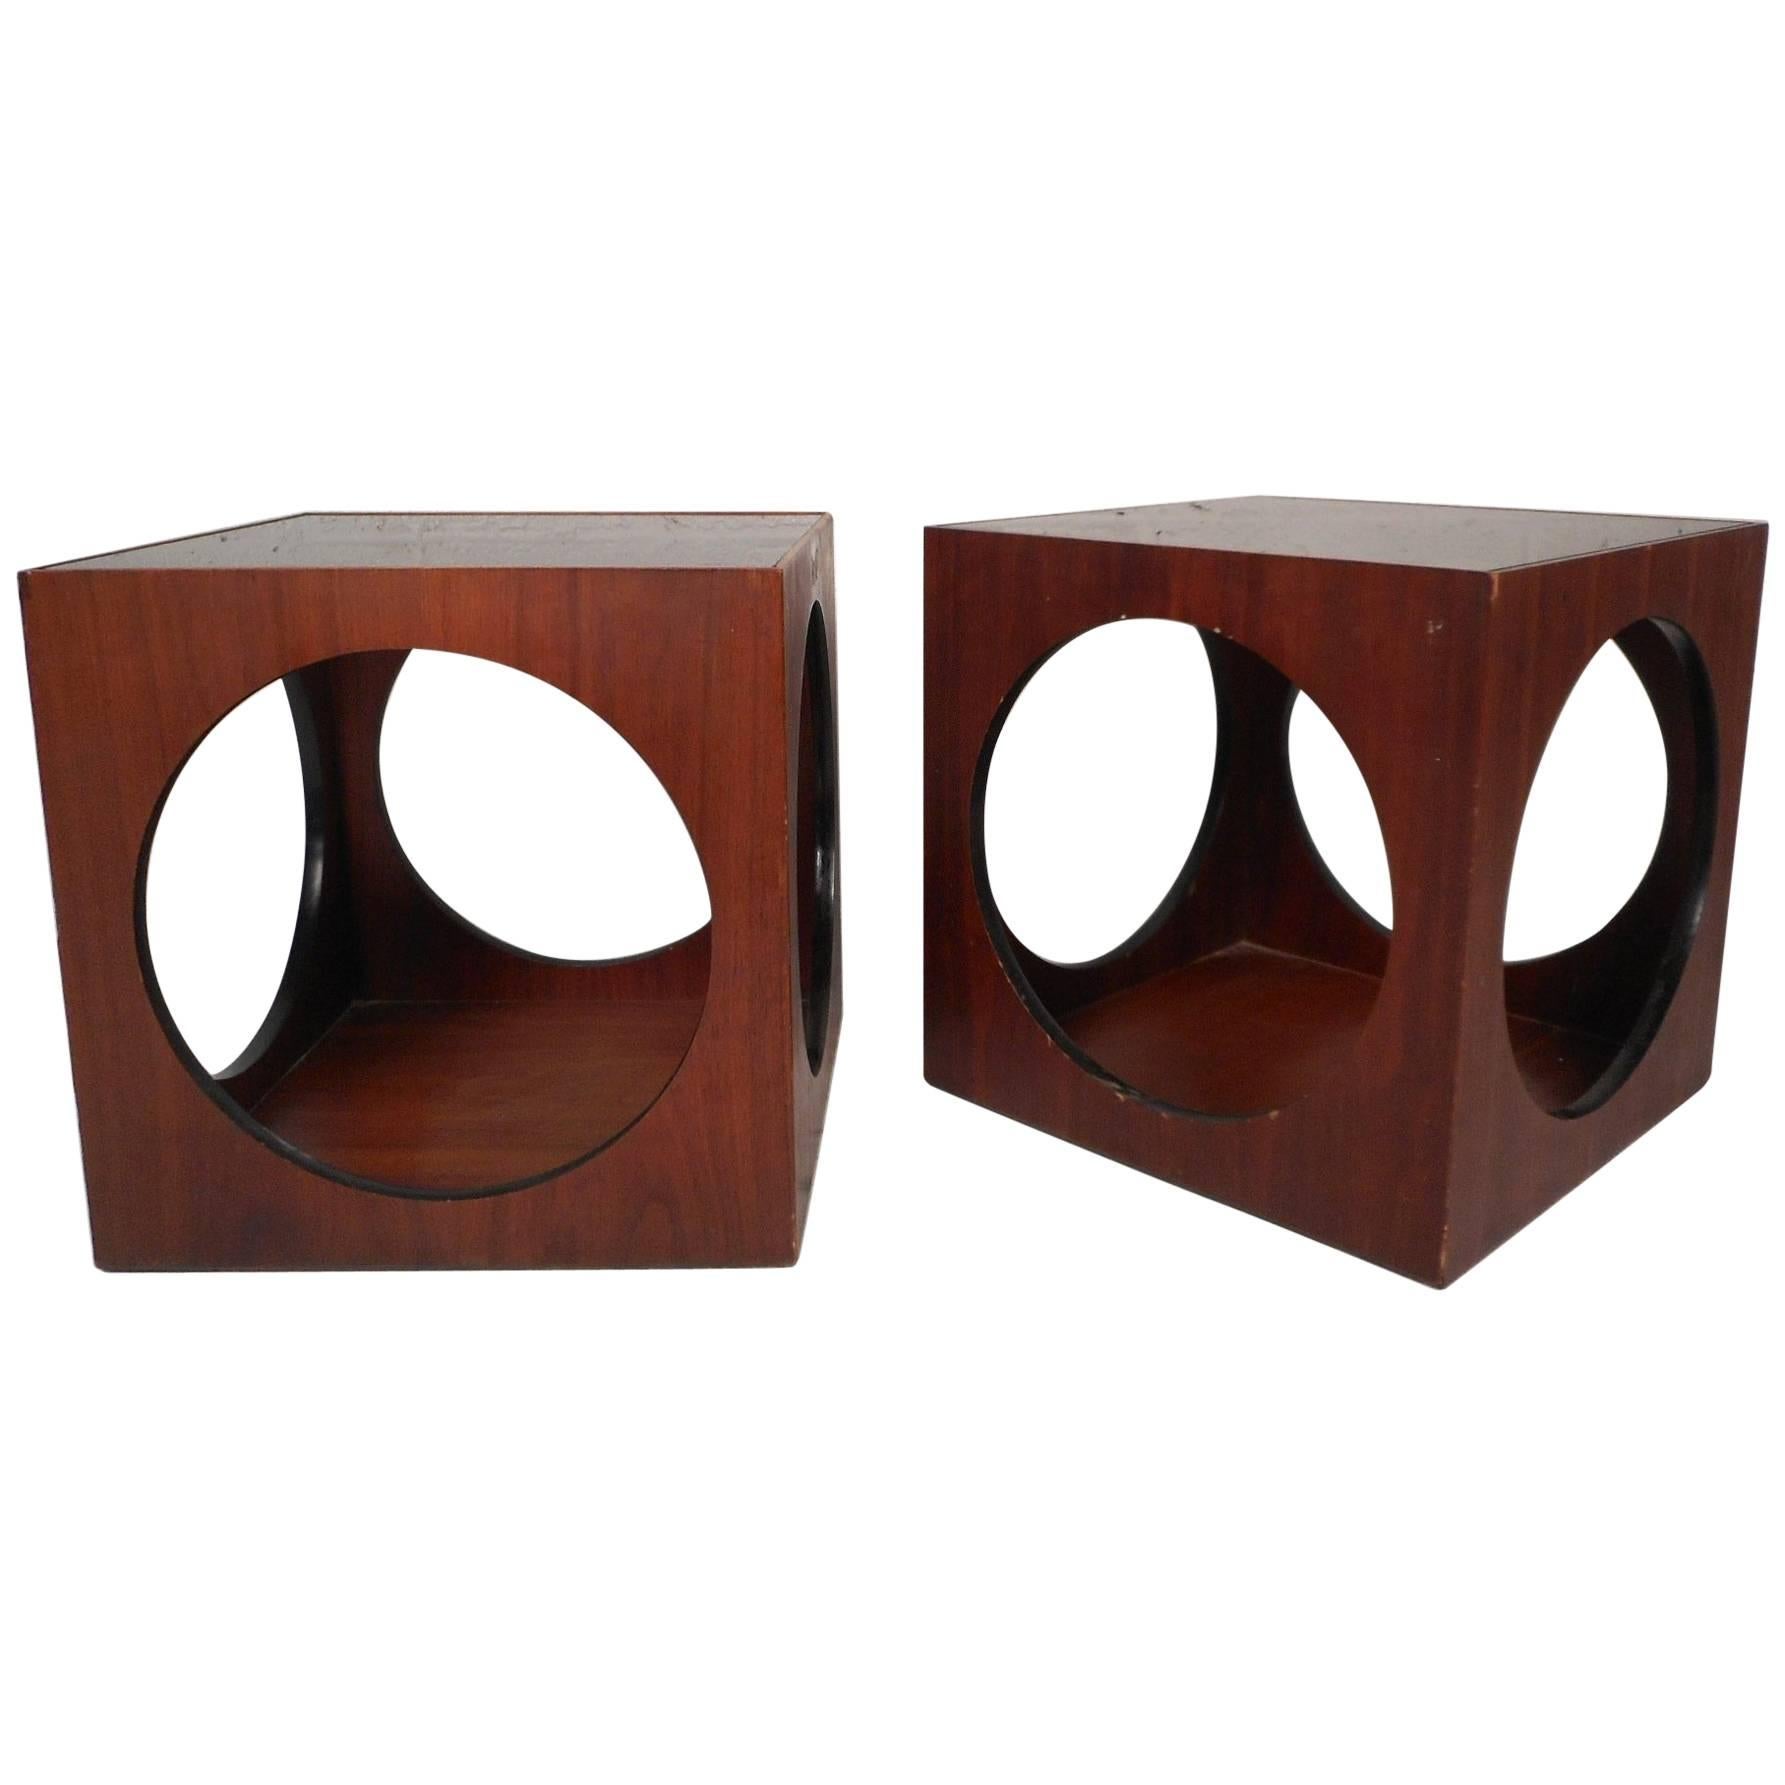 Pair of Mid-Century Modern Cube End Tables